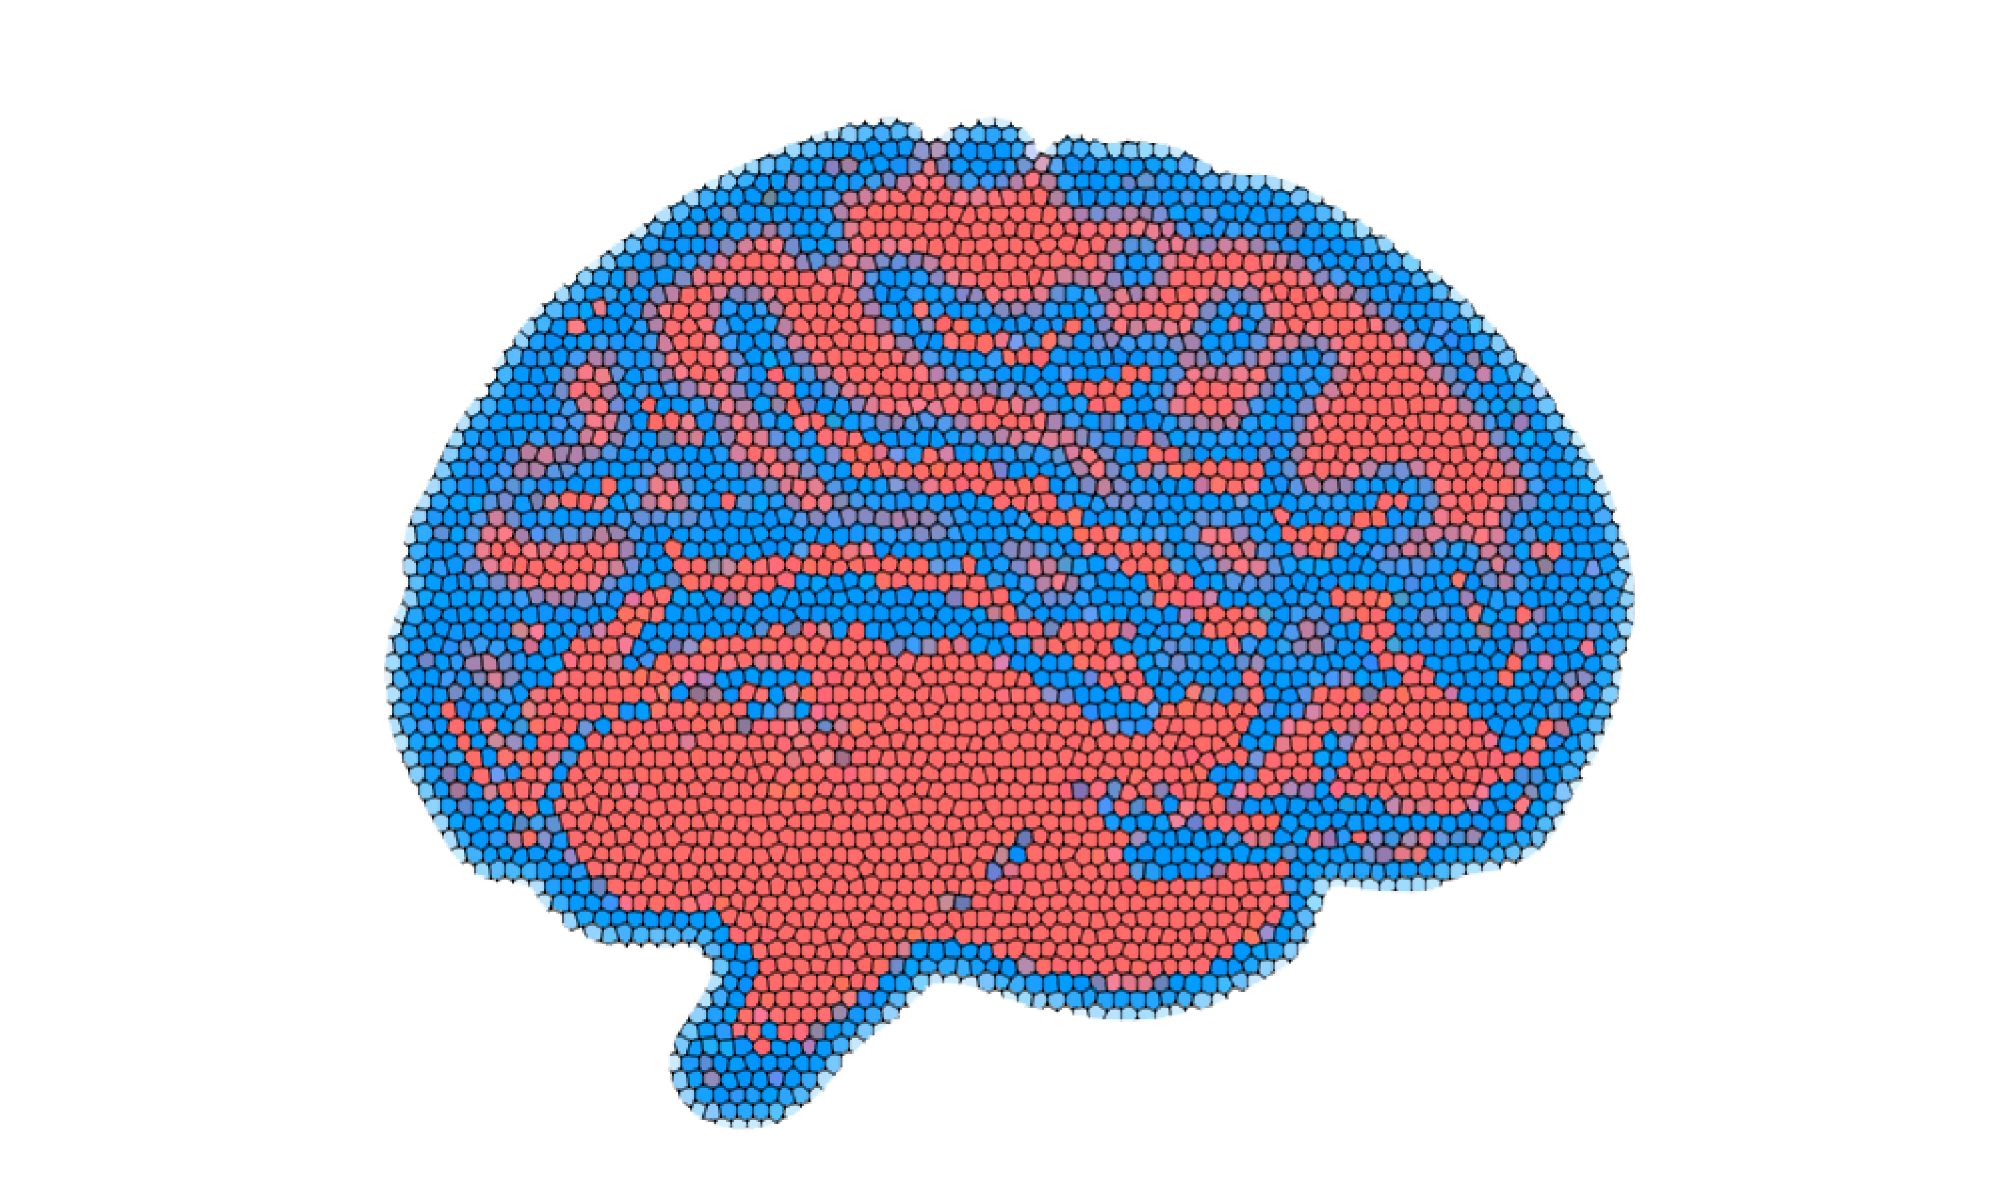 Pixelated image of a brain with red, blue, and purple regions